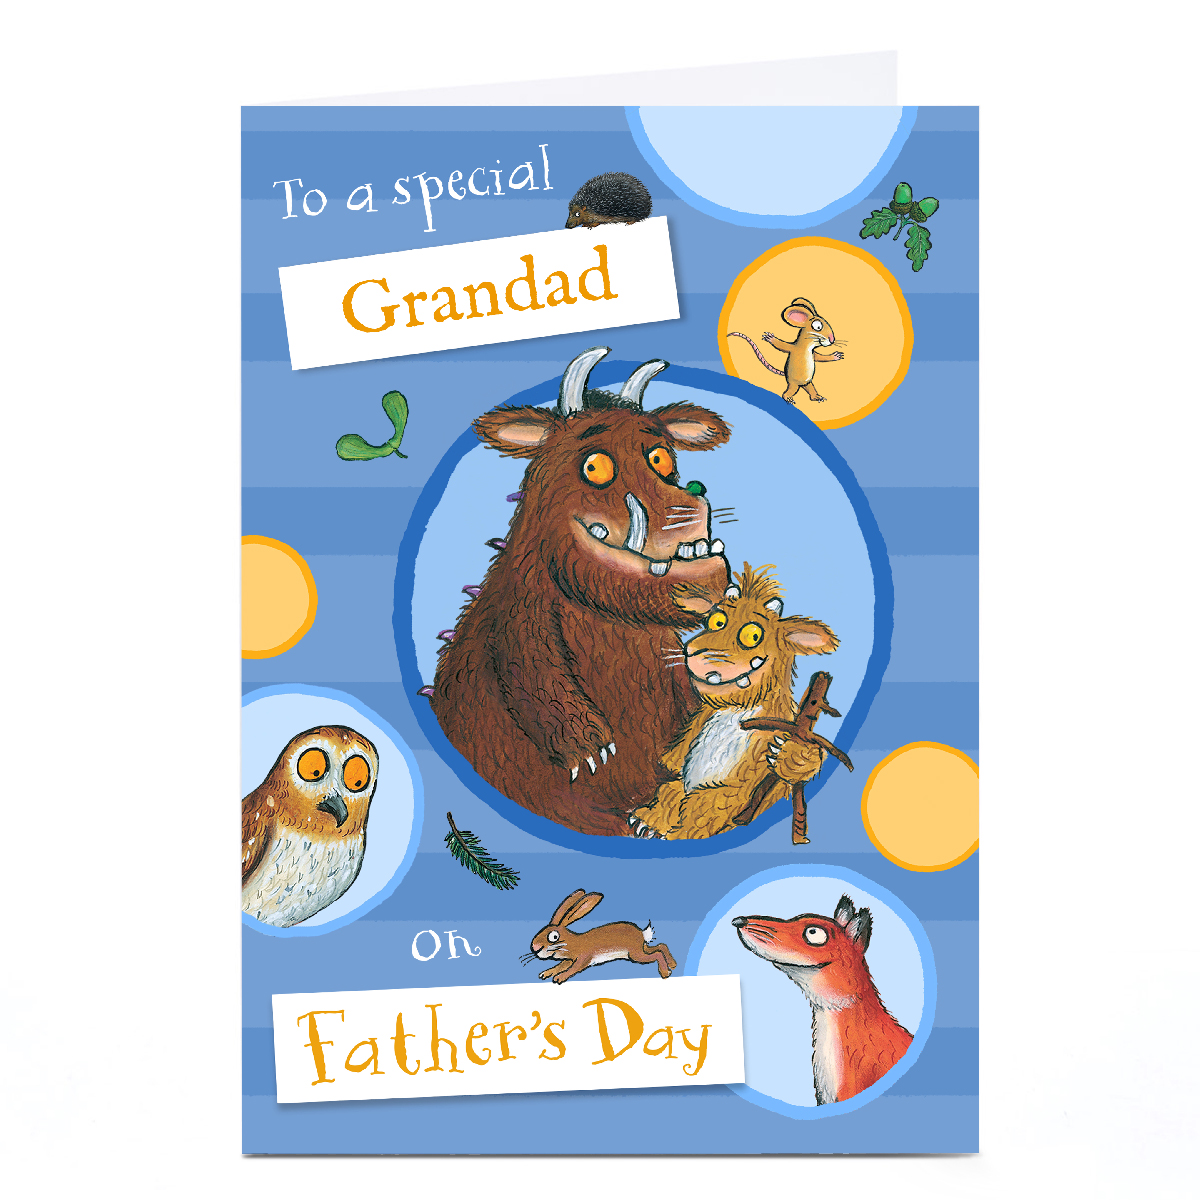 Personalised Gruffalo Father's Day Card - To a Special Grandad